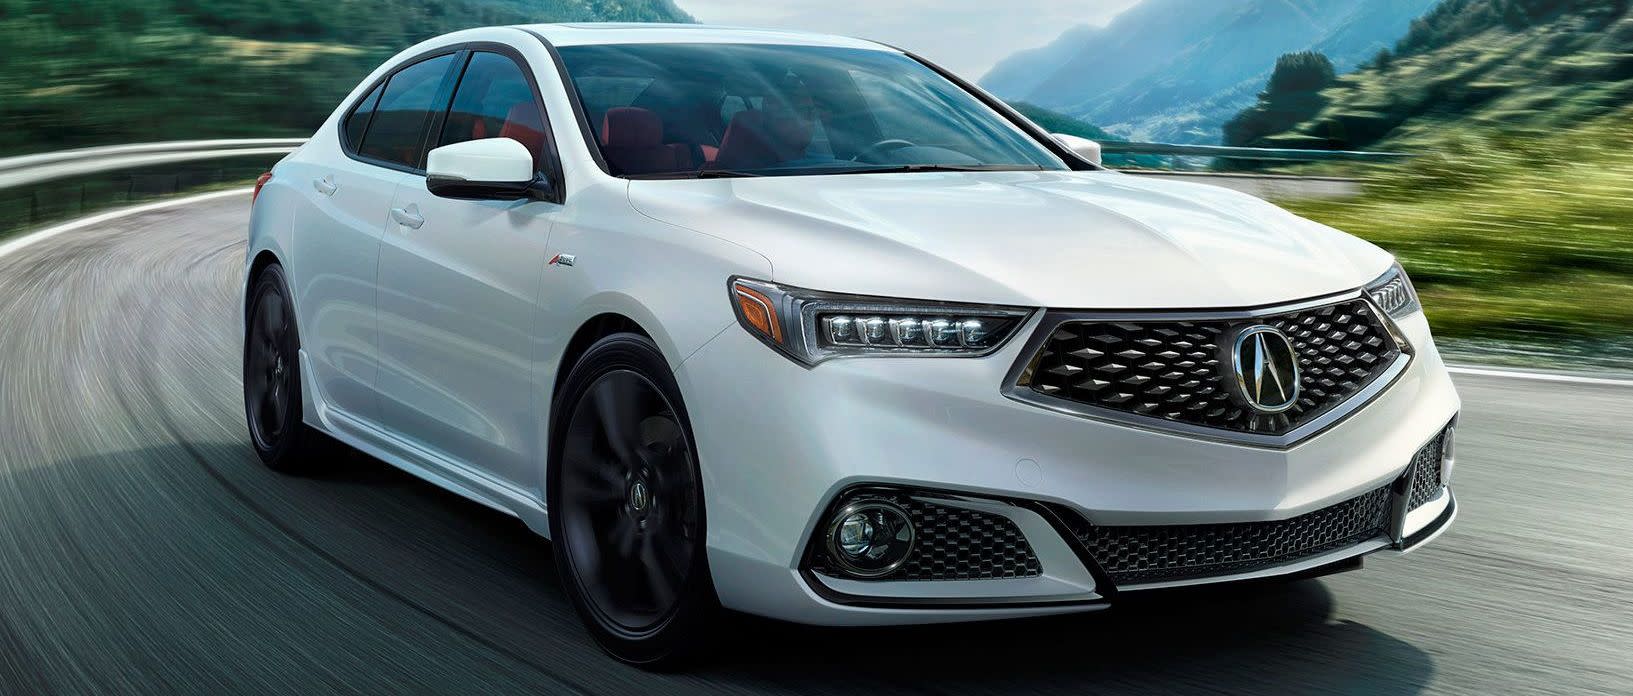 2018 Acura TLX Review & Specs | Ball Acura | New & Used Acuras